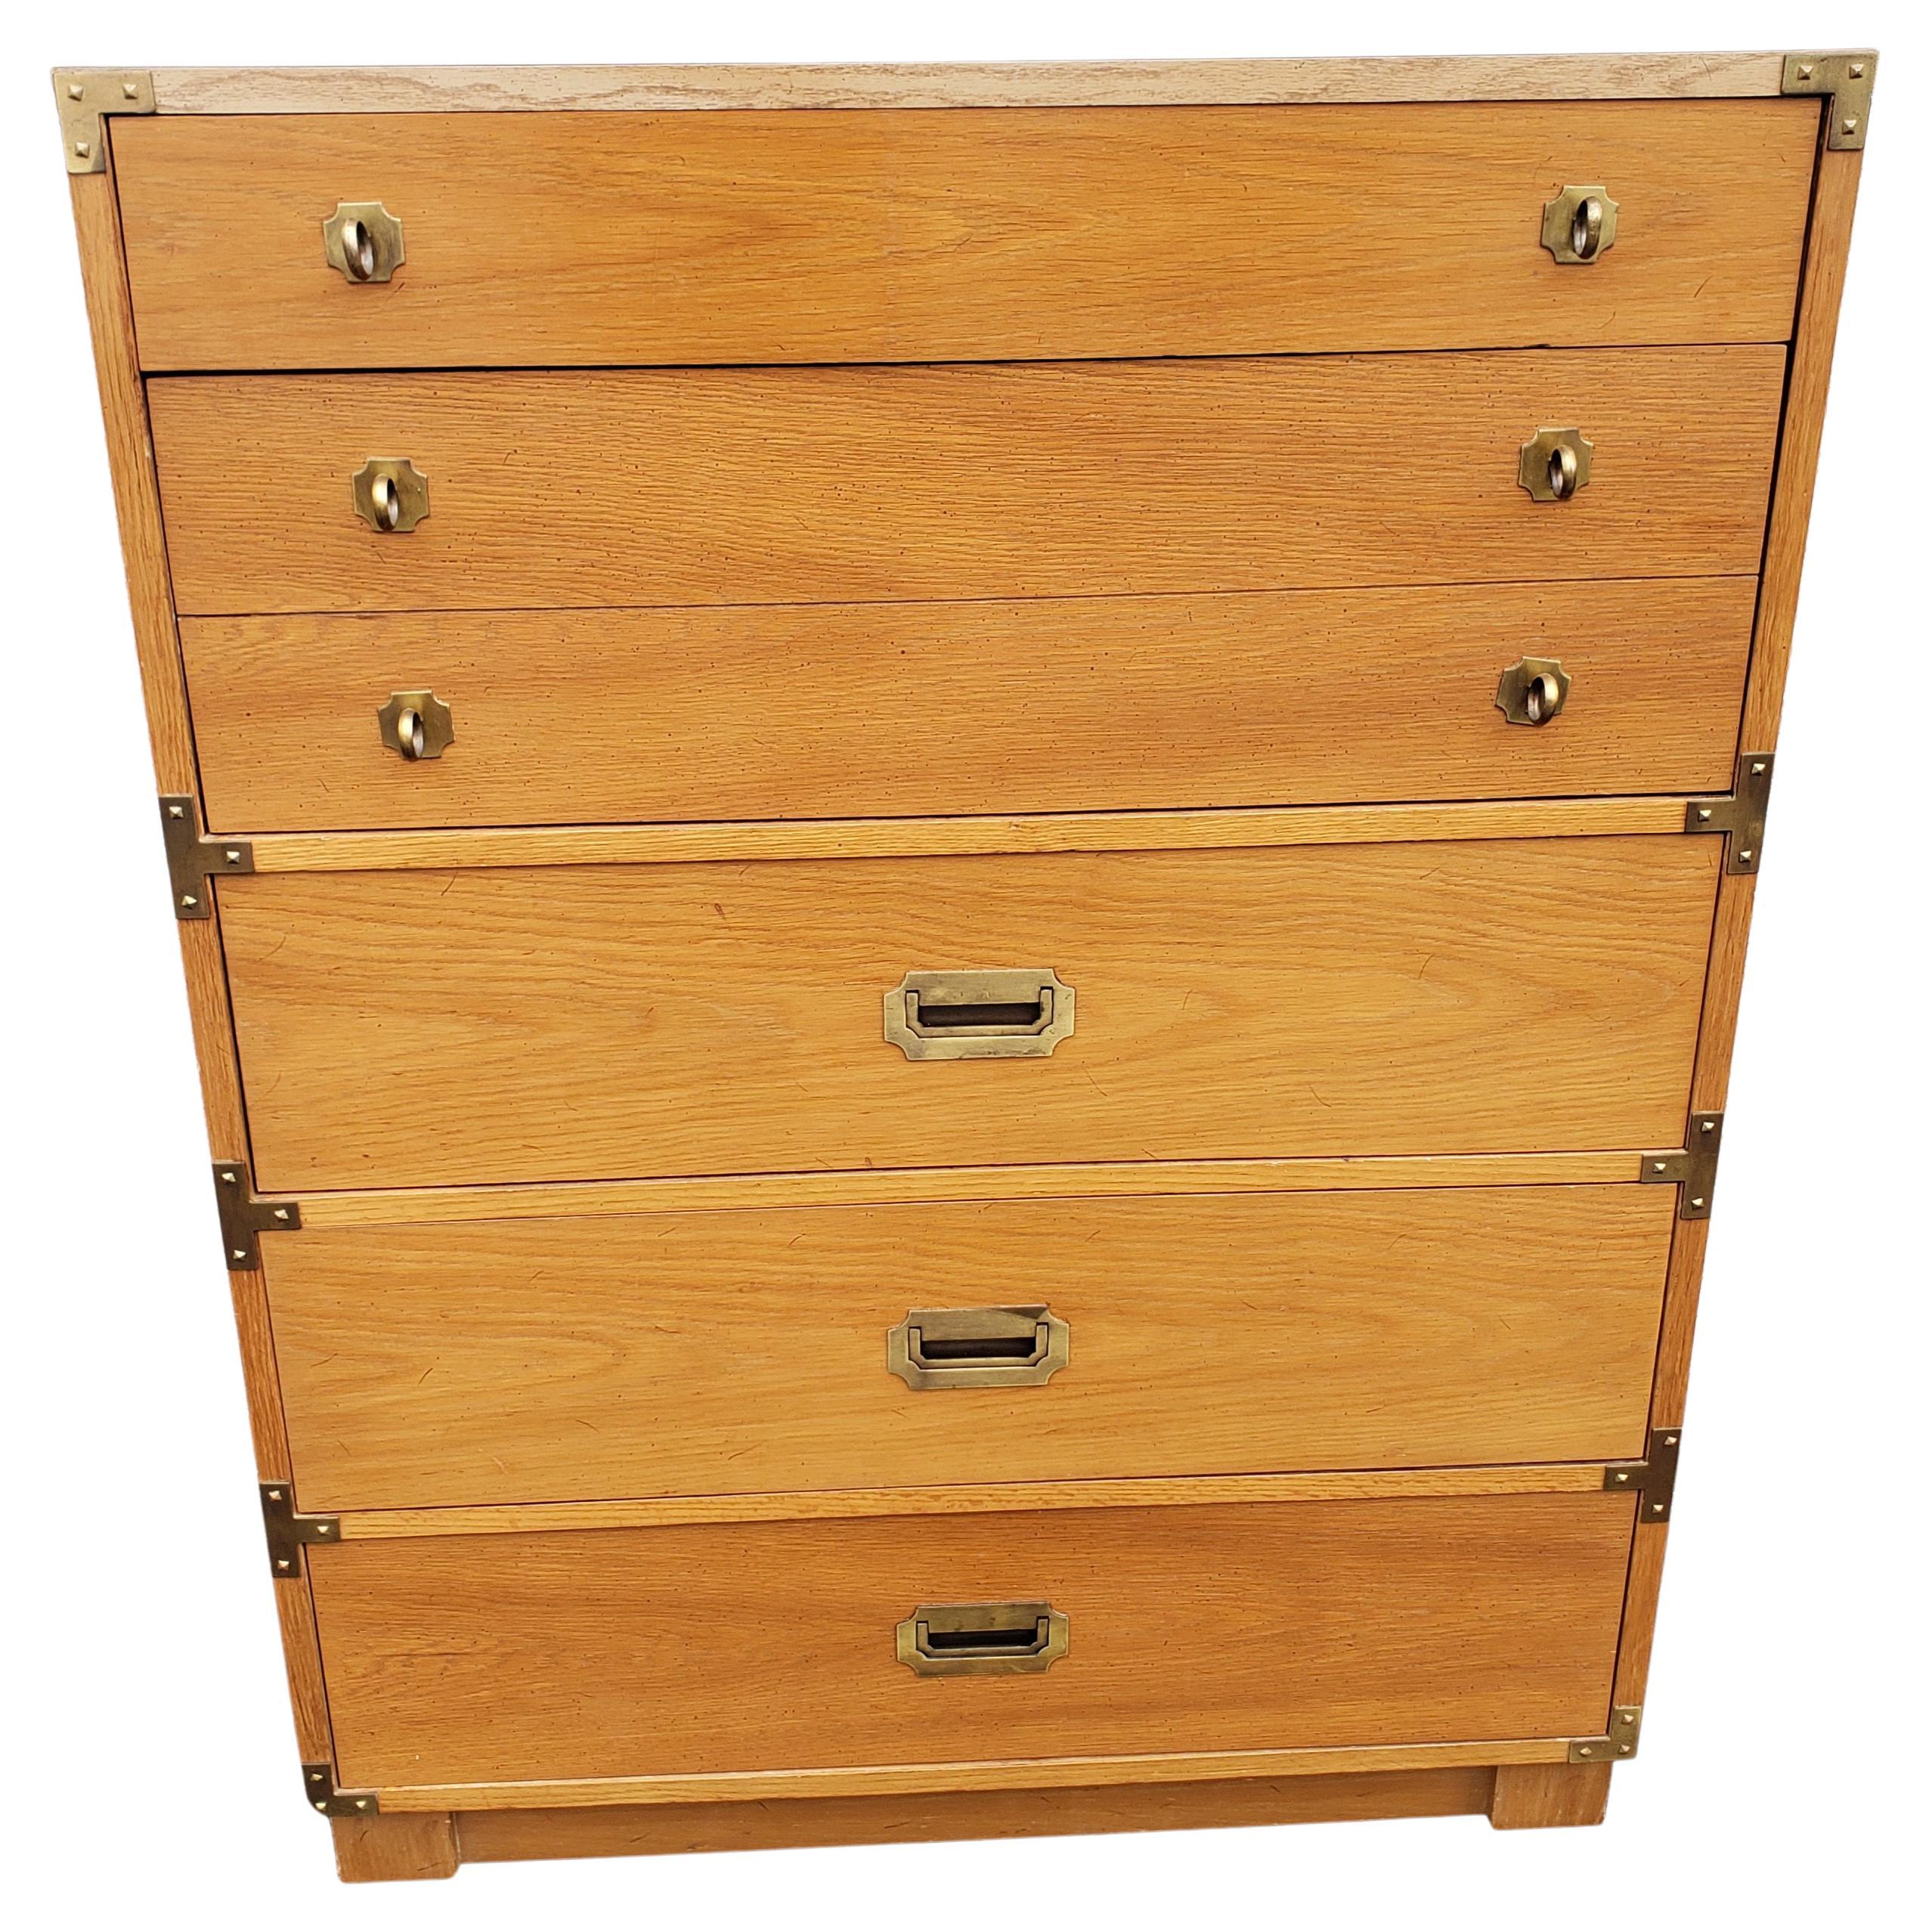 Offered is a beautiful 1966 Campaign Chest of drawers / Bachelor campaign Chest in excellent condition by Drexel.
Smooth gliding dovetail drawers.
Measures 34